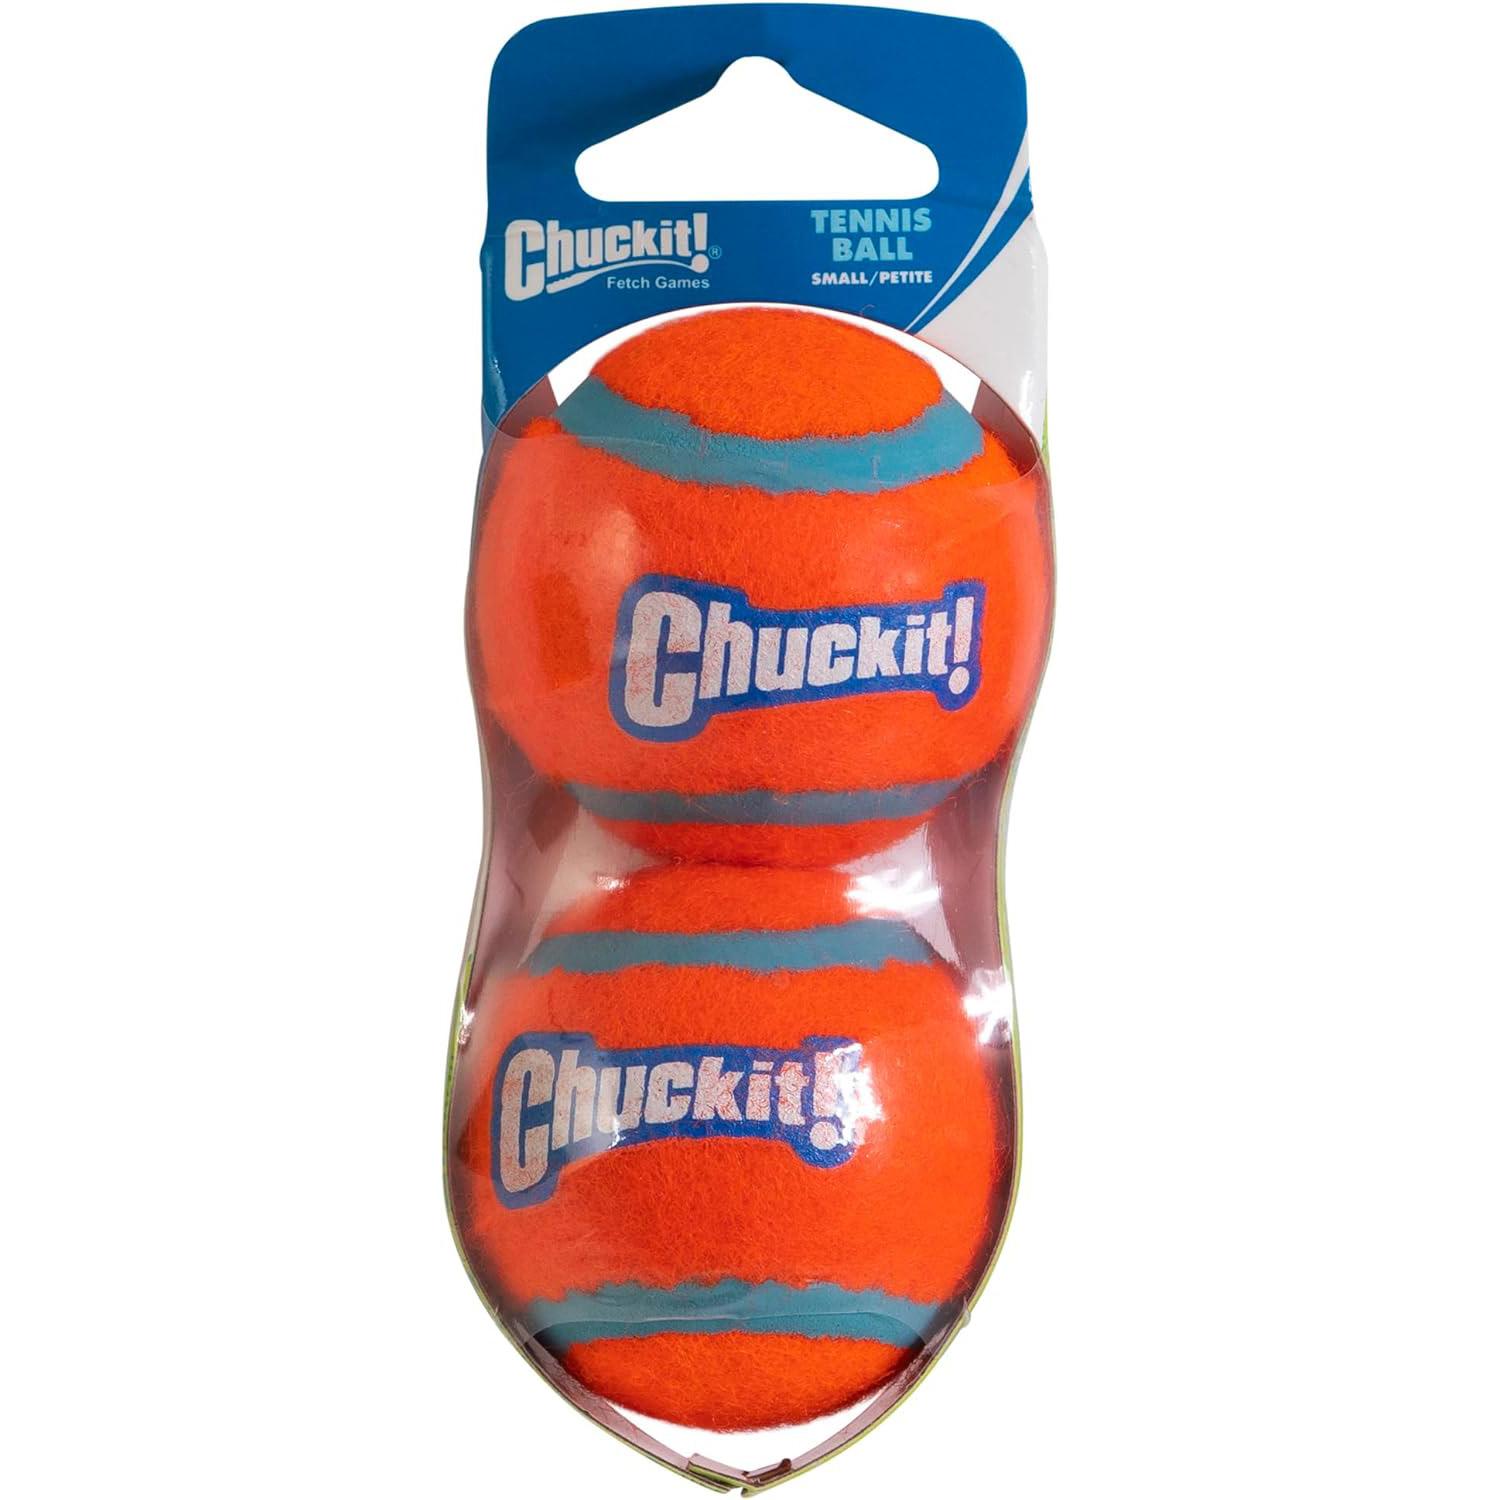 Chuckit Dog Small Tennis Ball Dog Toy 2 Pack for $2.20